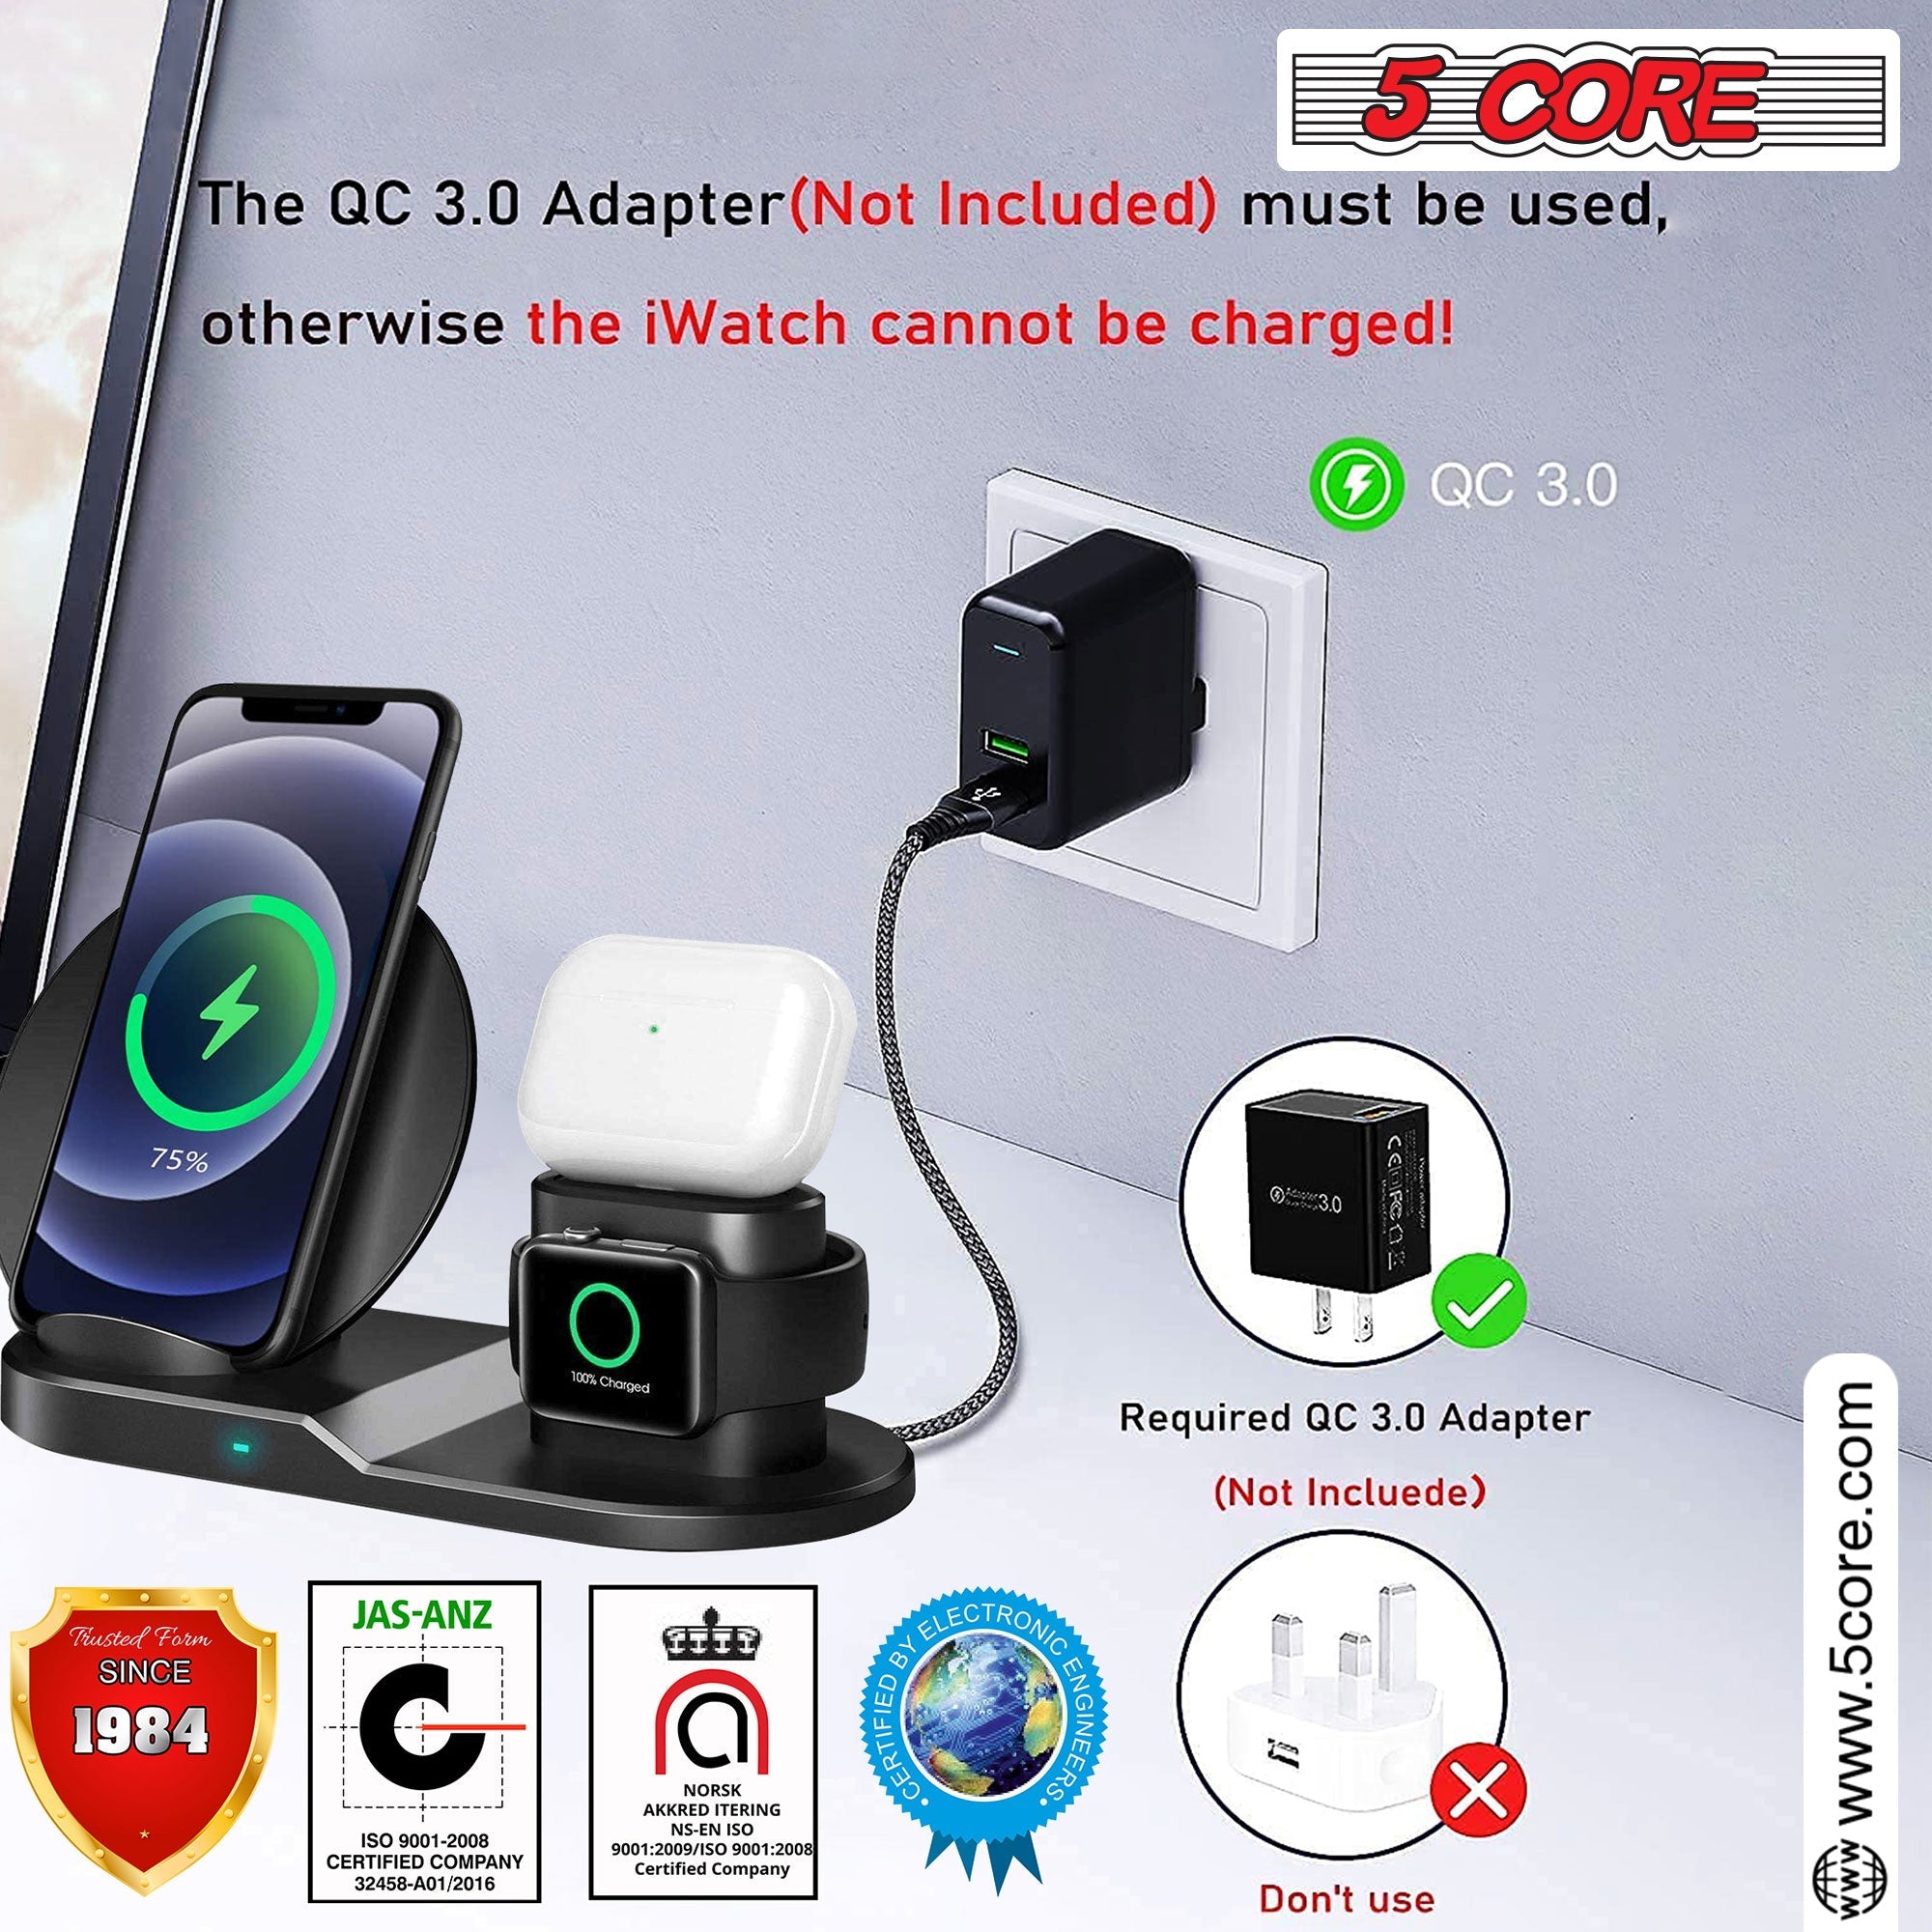 5 Core 3 in 1 Wireless Charging Station - Everyday-Sales.com